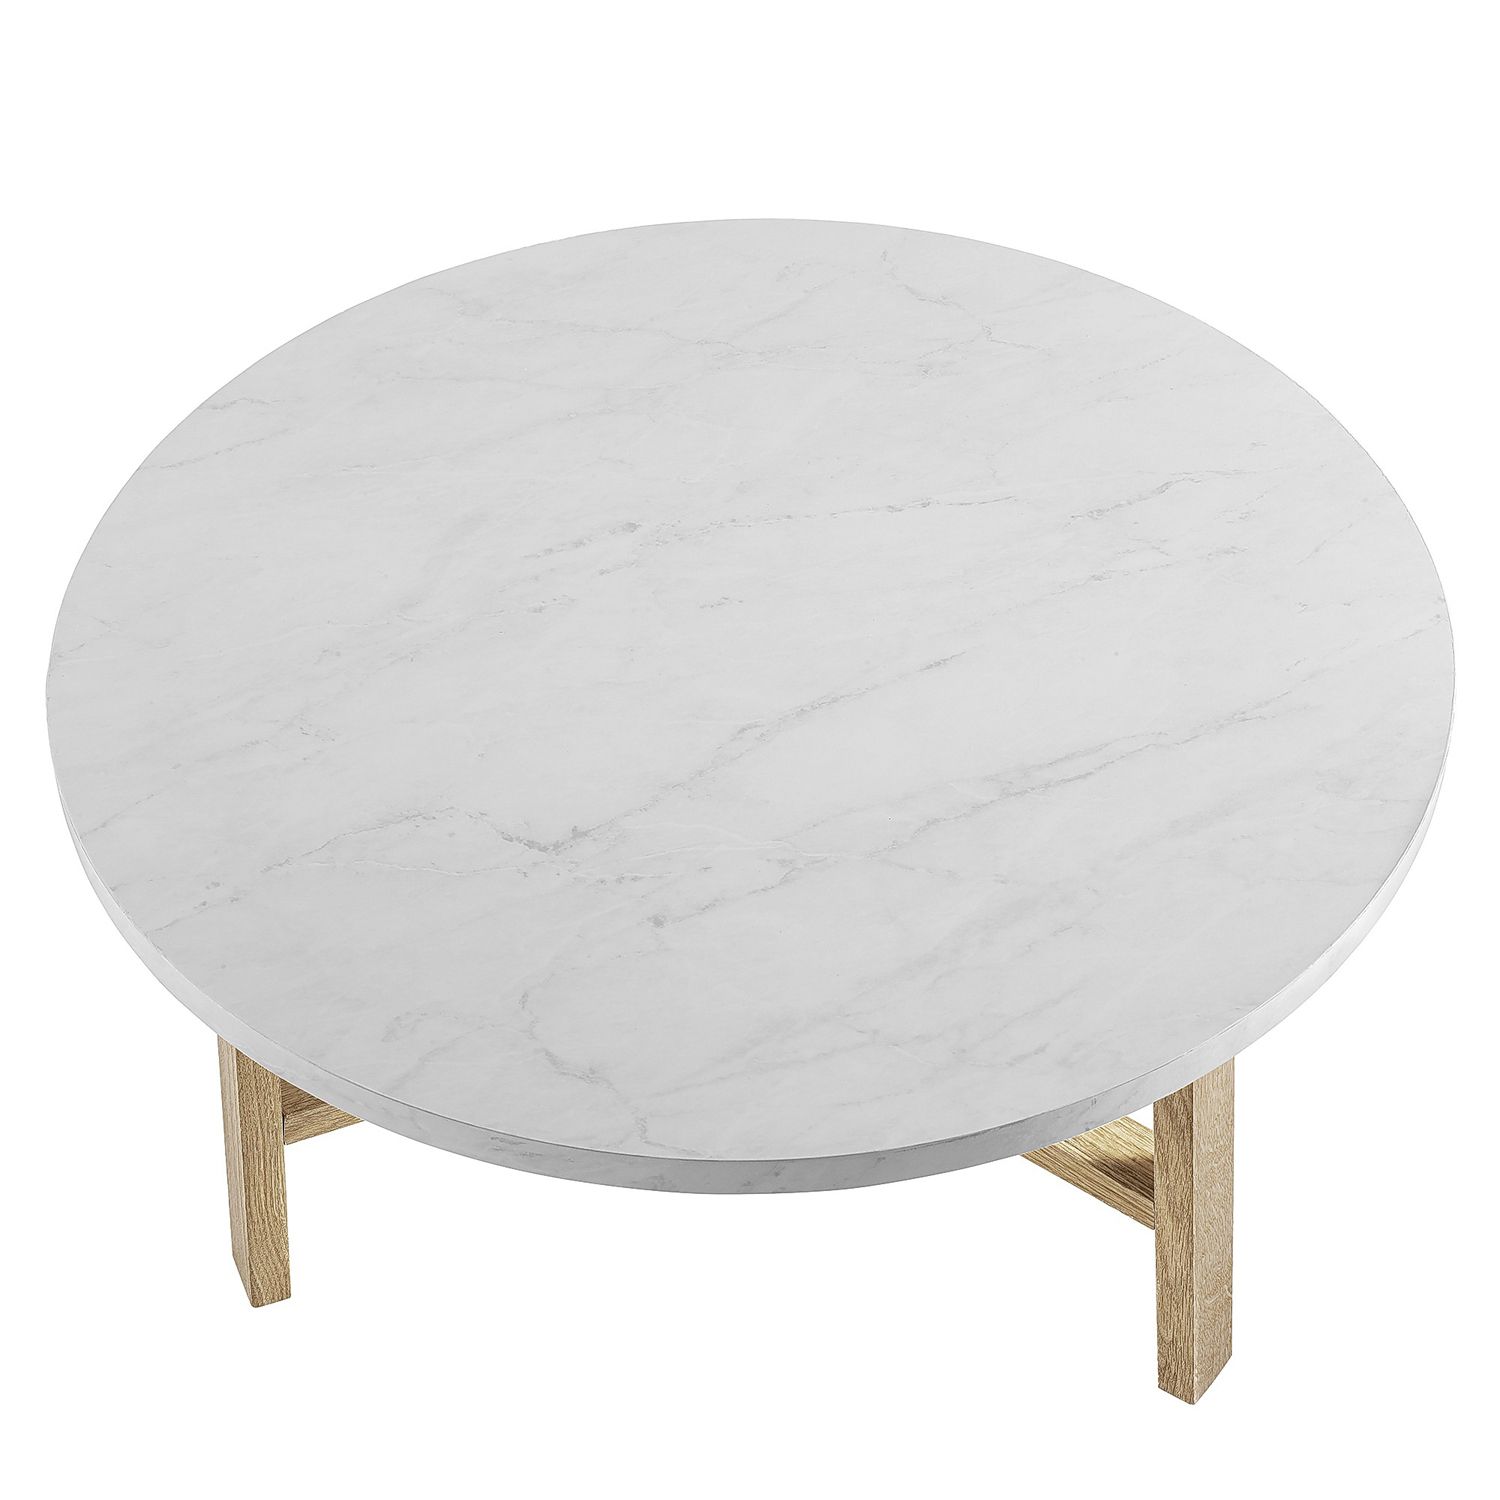 Modern White Faux Marble Round Coffee Table – Pier1 With Modern Round Faux Marble Coffee Tables (View 6 of 20)